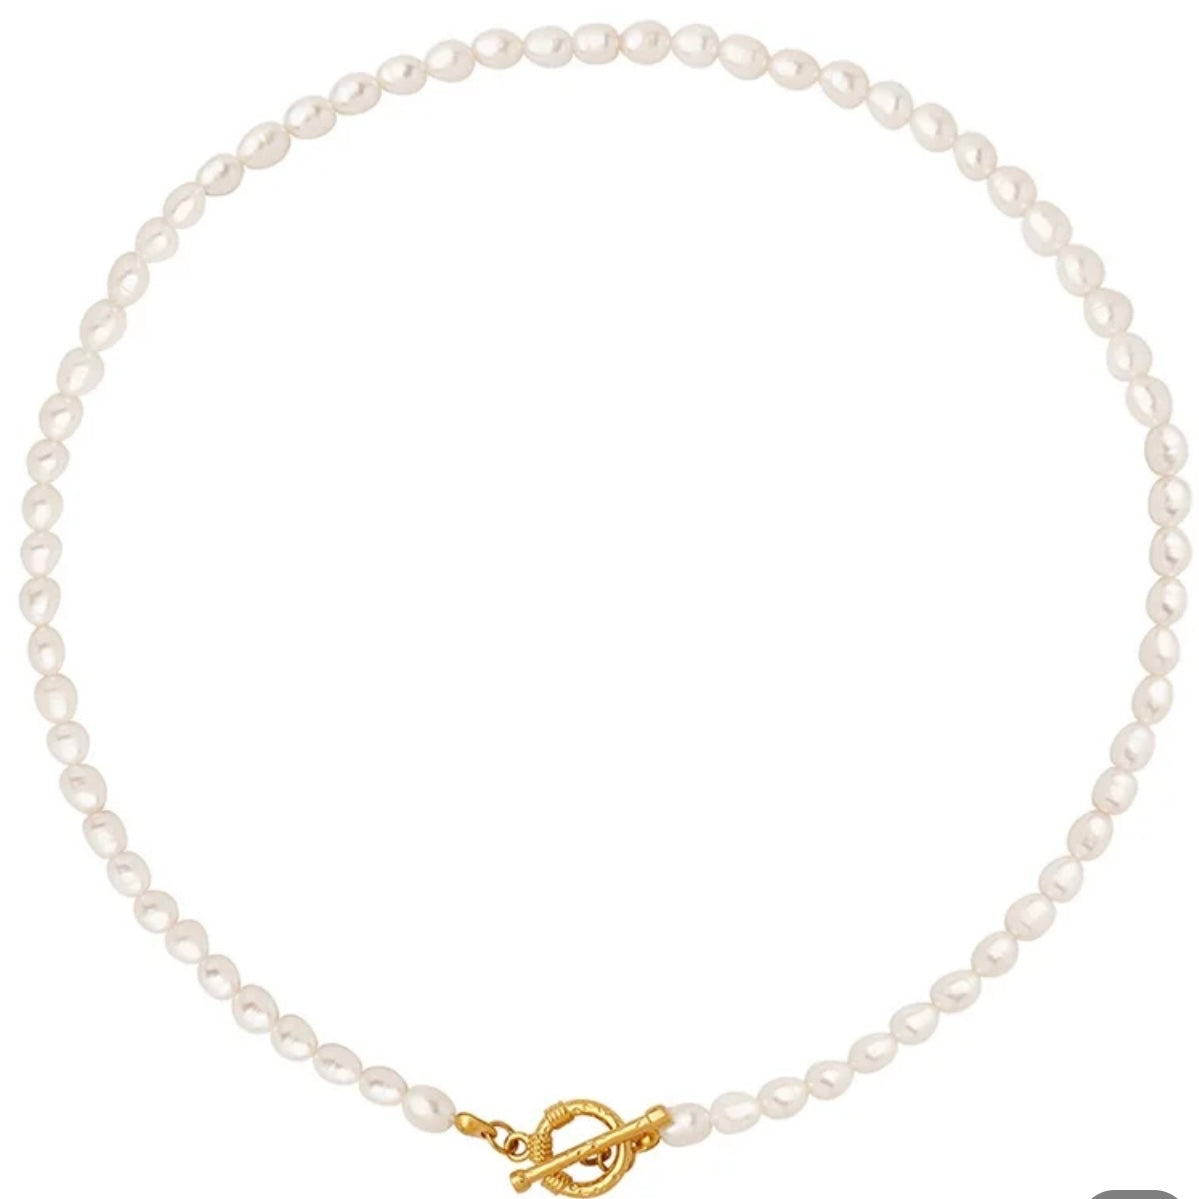 Delicate freshwater pearl necklace